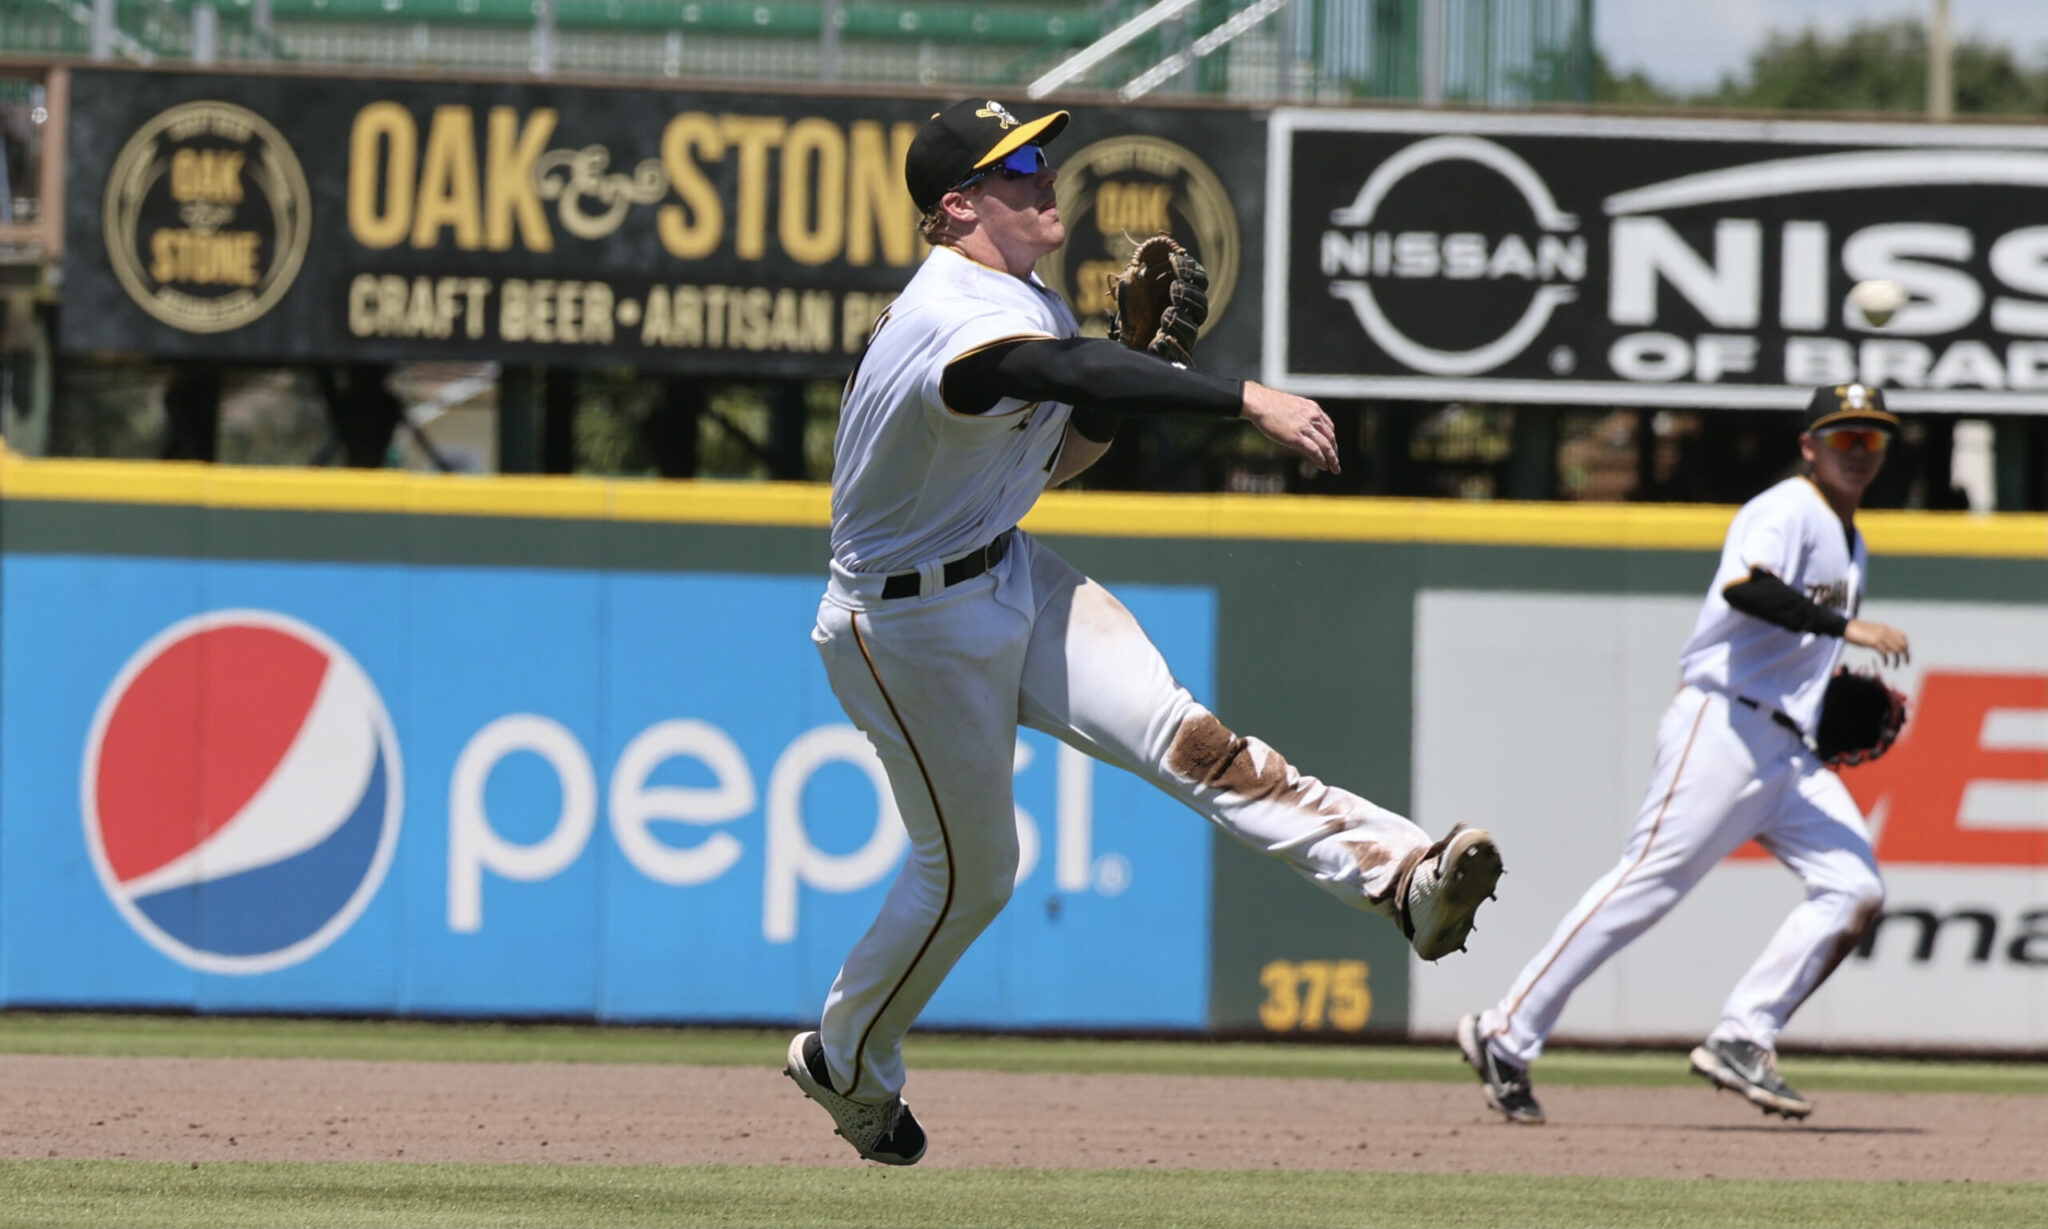 Pirates Prospects Daily: Which Path Will Jack Brannigan Travel Down?